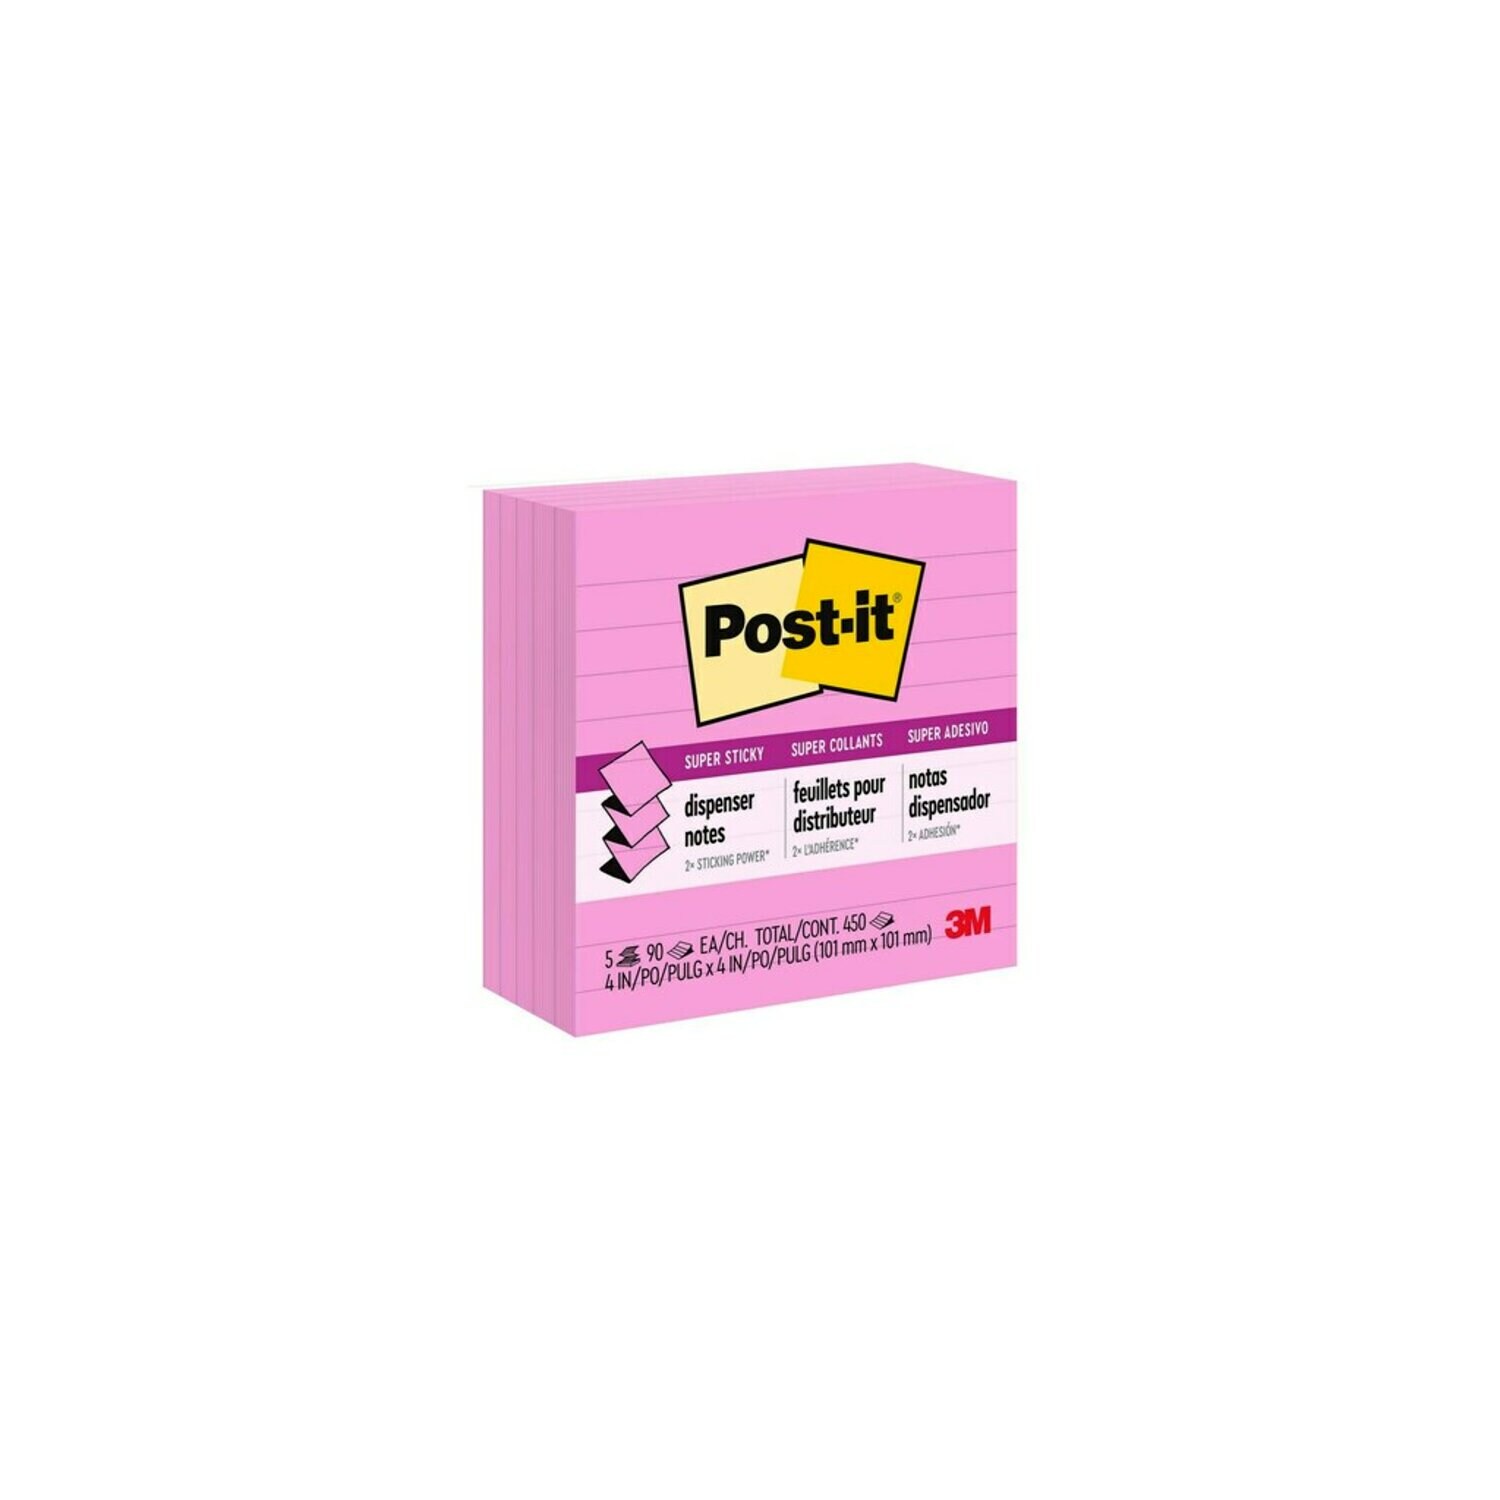 7100229679 - Post-it Super Sticky Dispenser Pop-up Notes Notes R440-NPSS, 4 in x 4 in (101 mm x 101 mm)